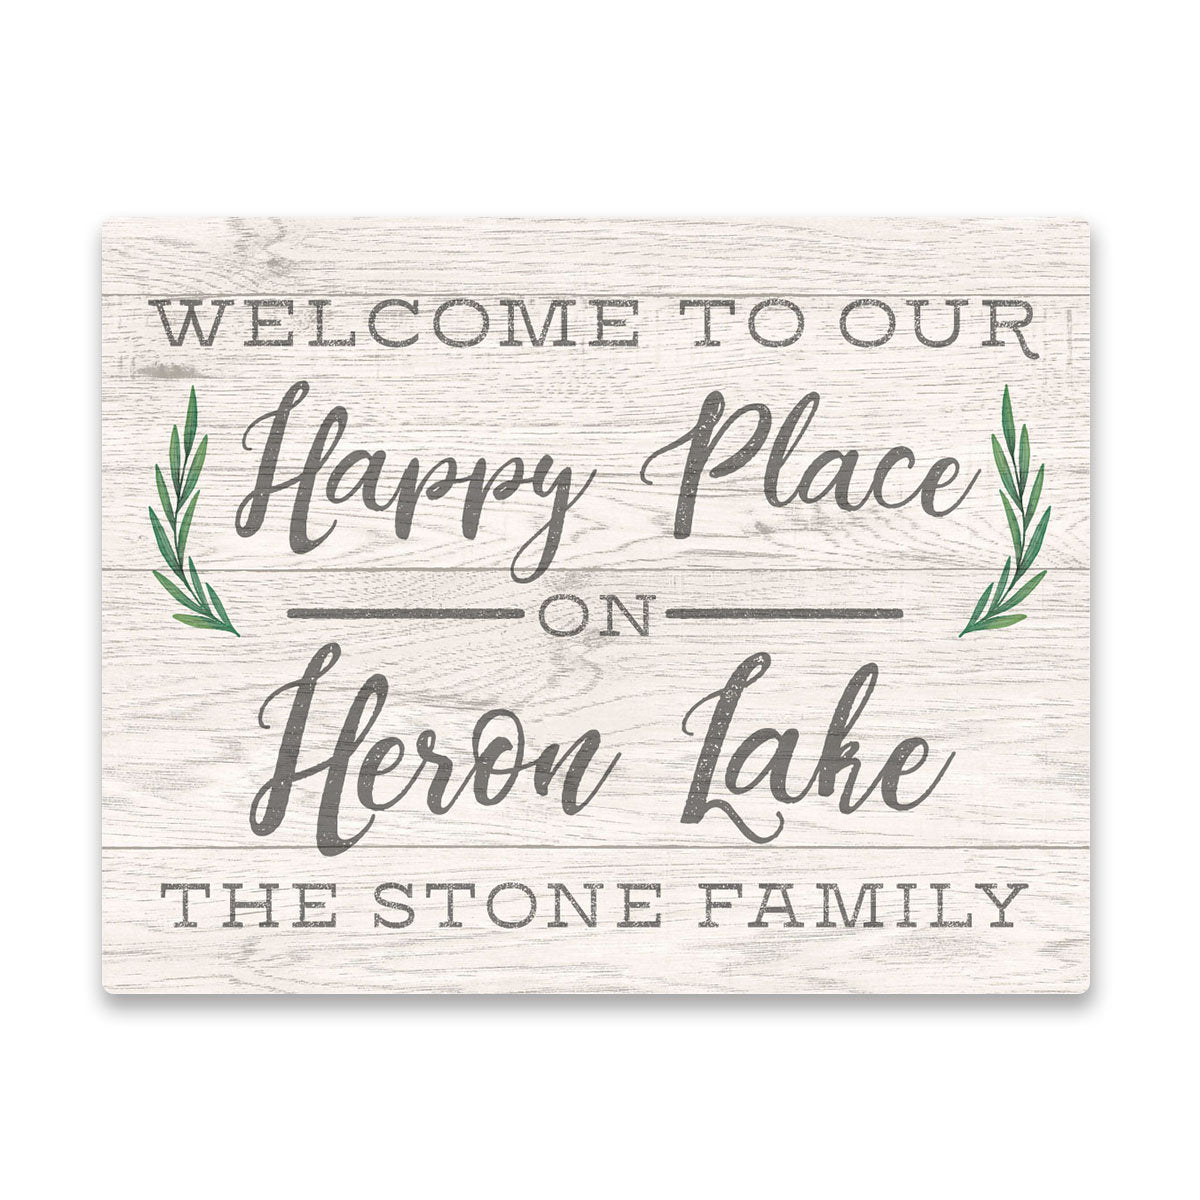 Personalized Welcome to Our Happy Place on Heron Lake Wall Art